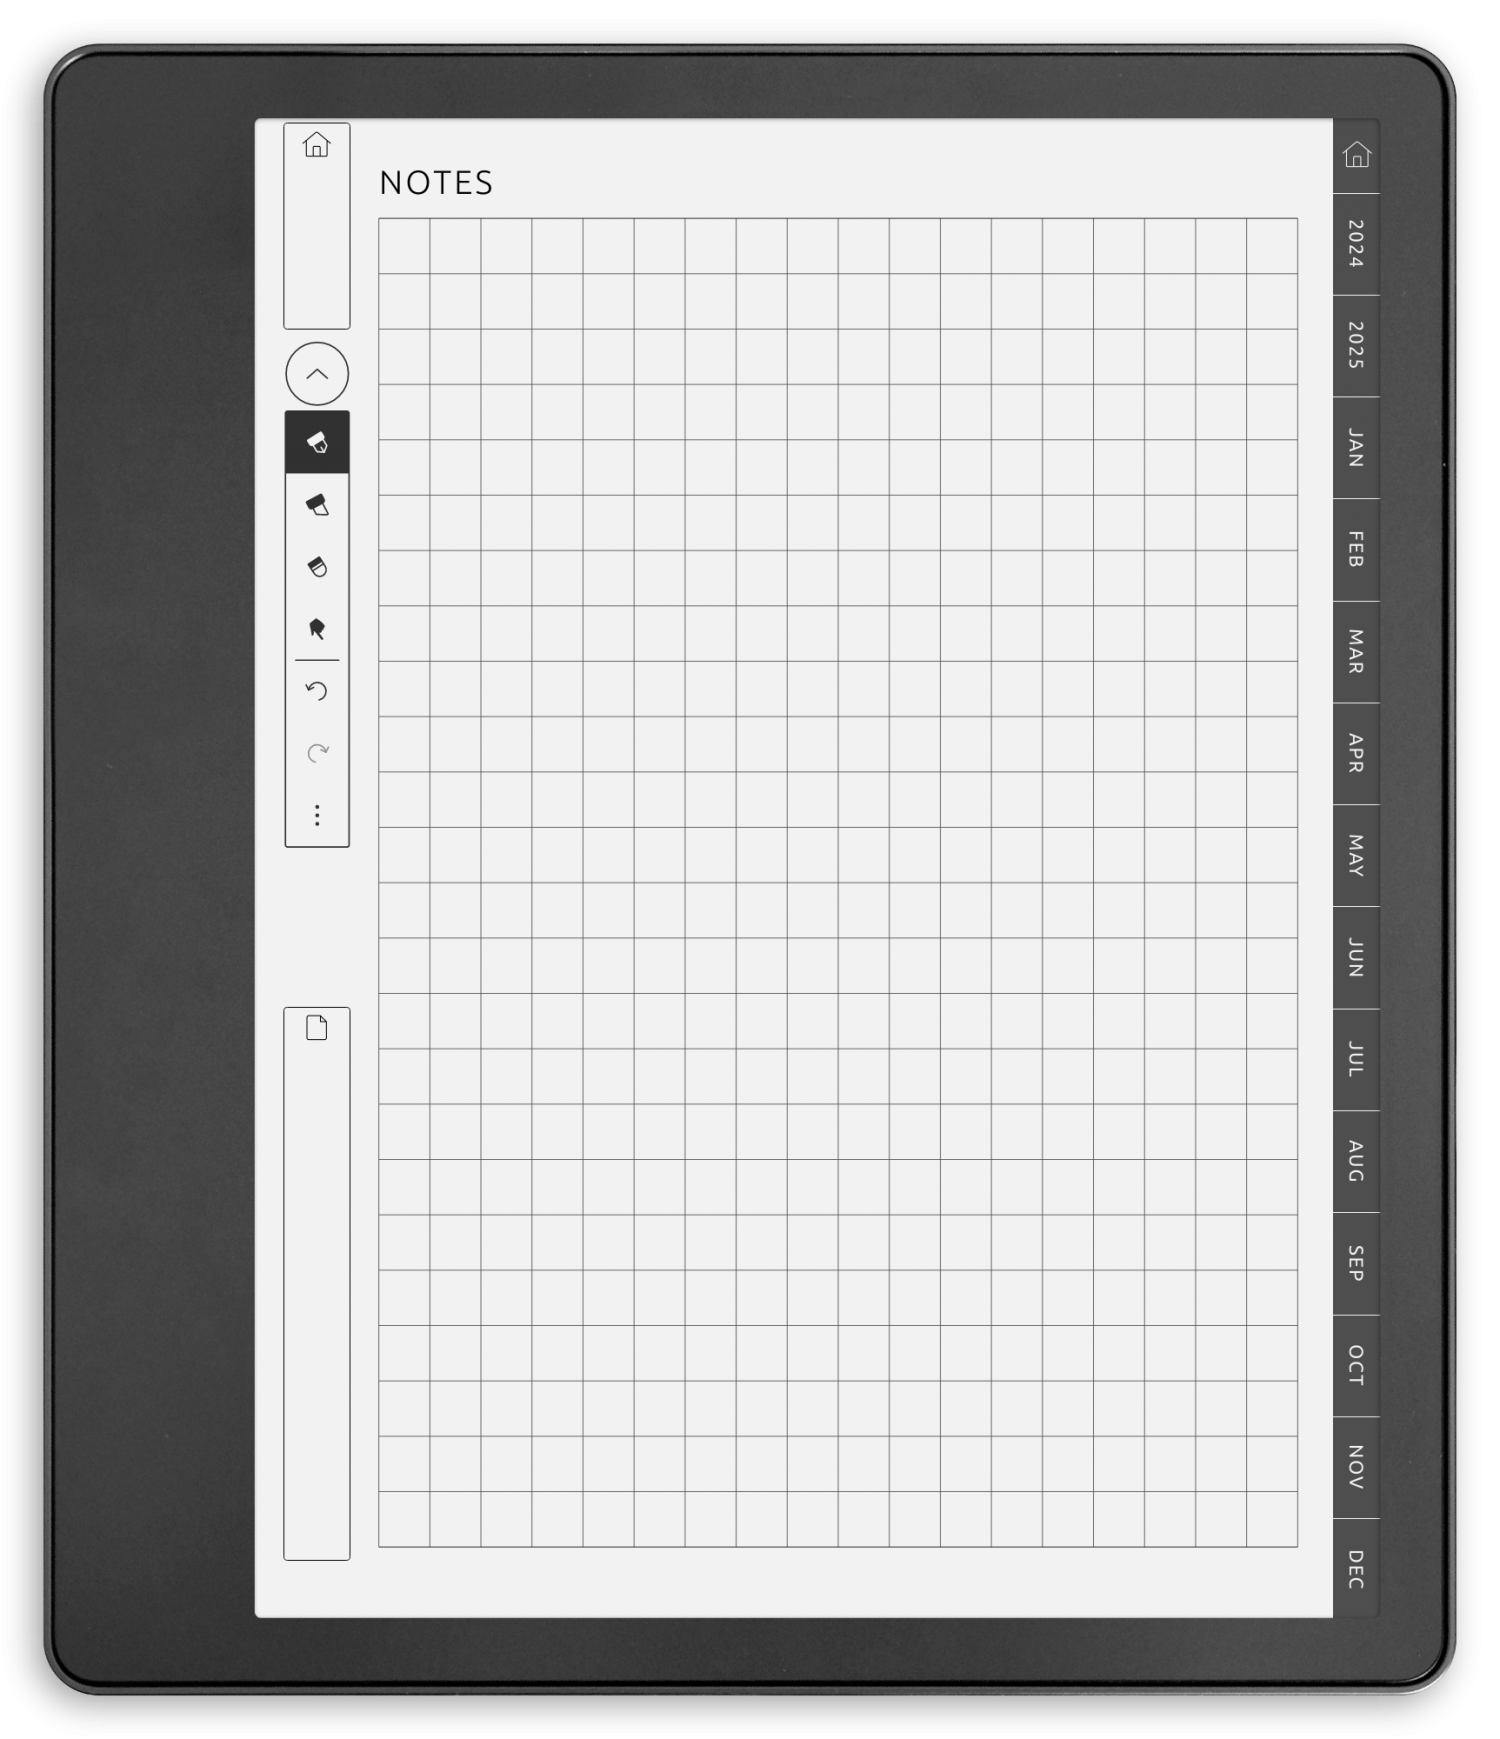 Kindle Scribe Daily Notes - Square Grid Journal - Portrait Original Theme